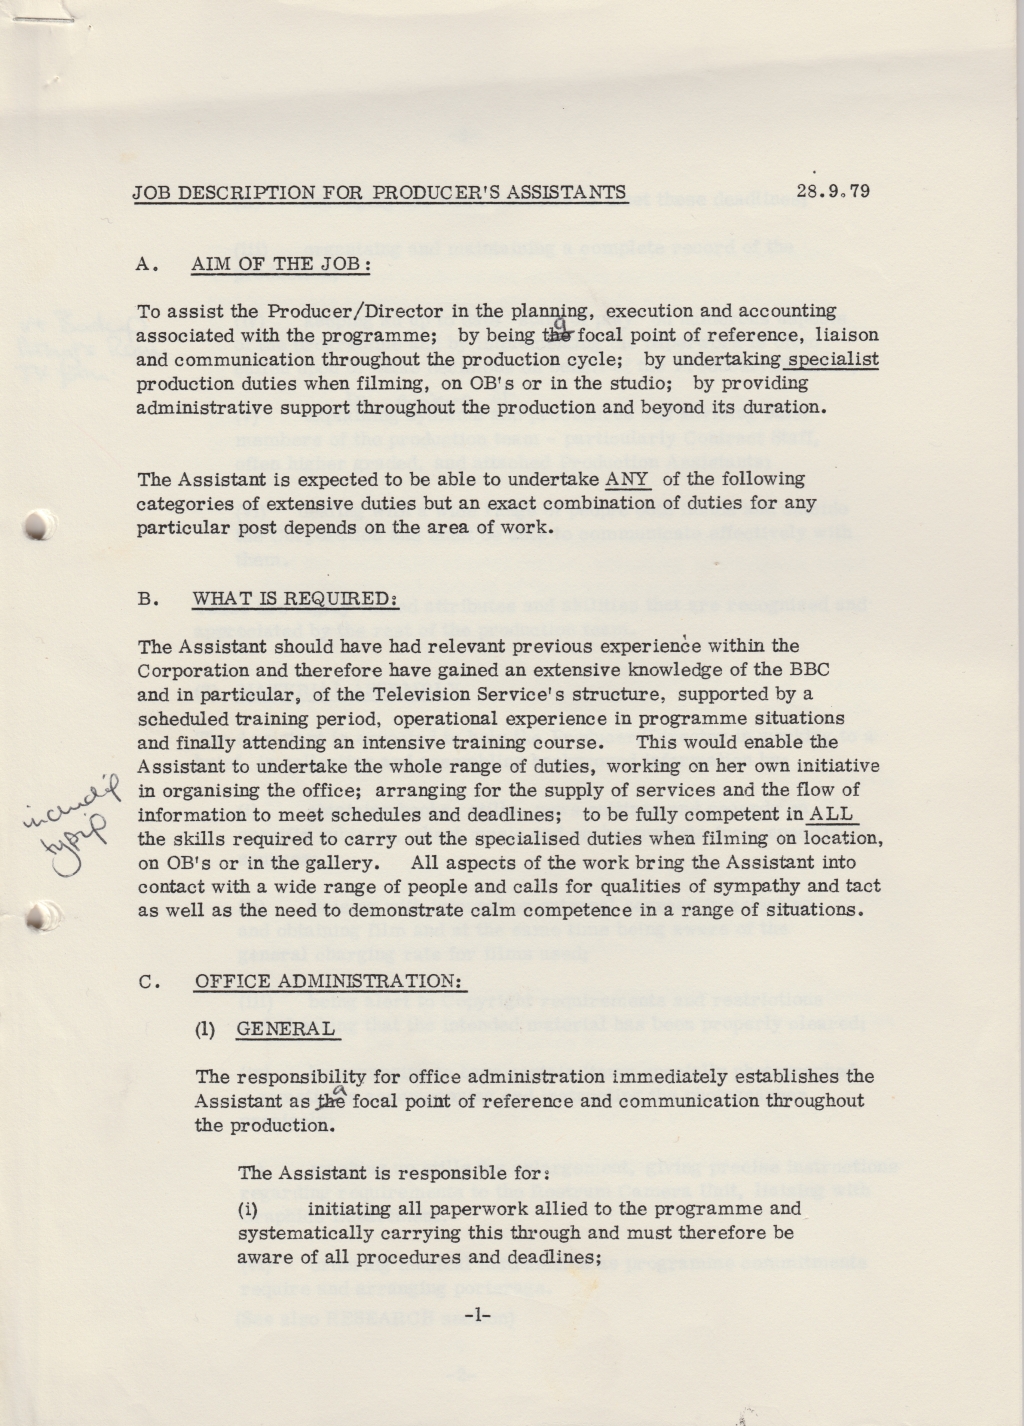 The first page of a job description setting out the tasks of an outside broadcast producer's assistant. Click to enlarge in a new tab.